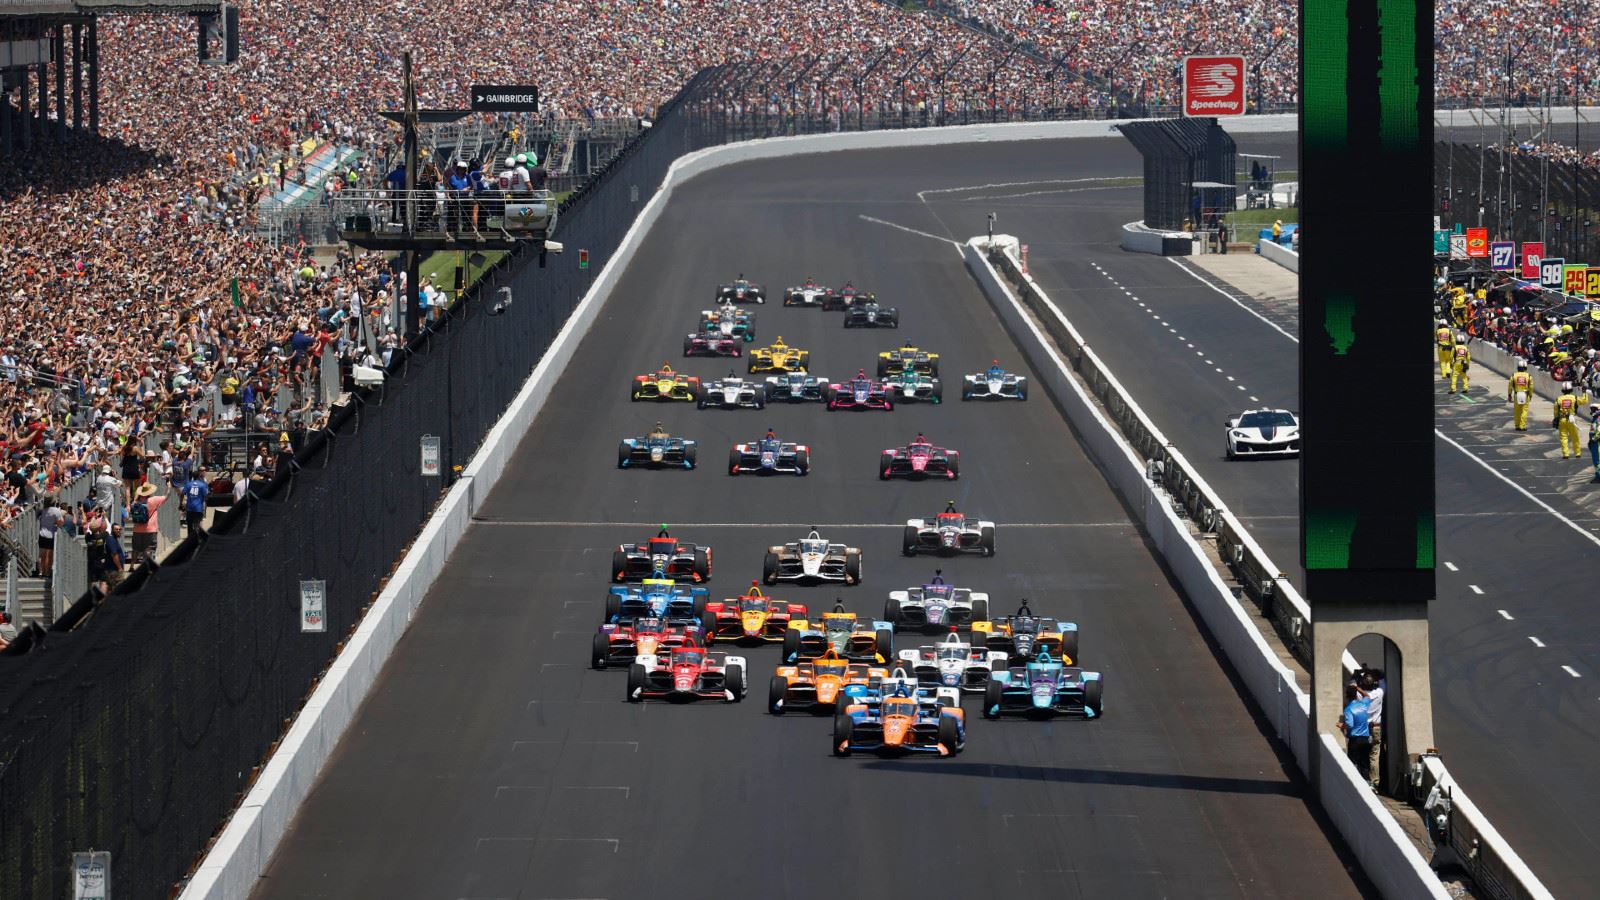 How To Watch Indy 500 In Indianapolis